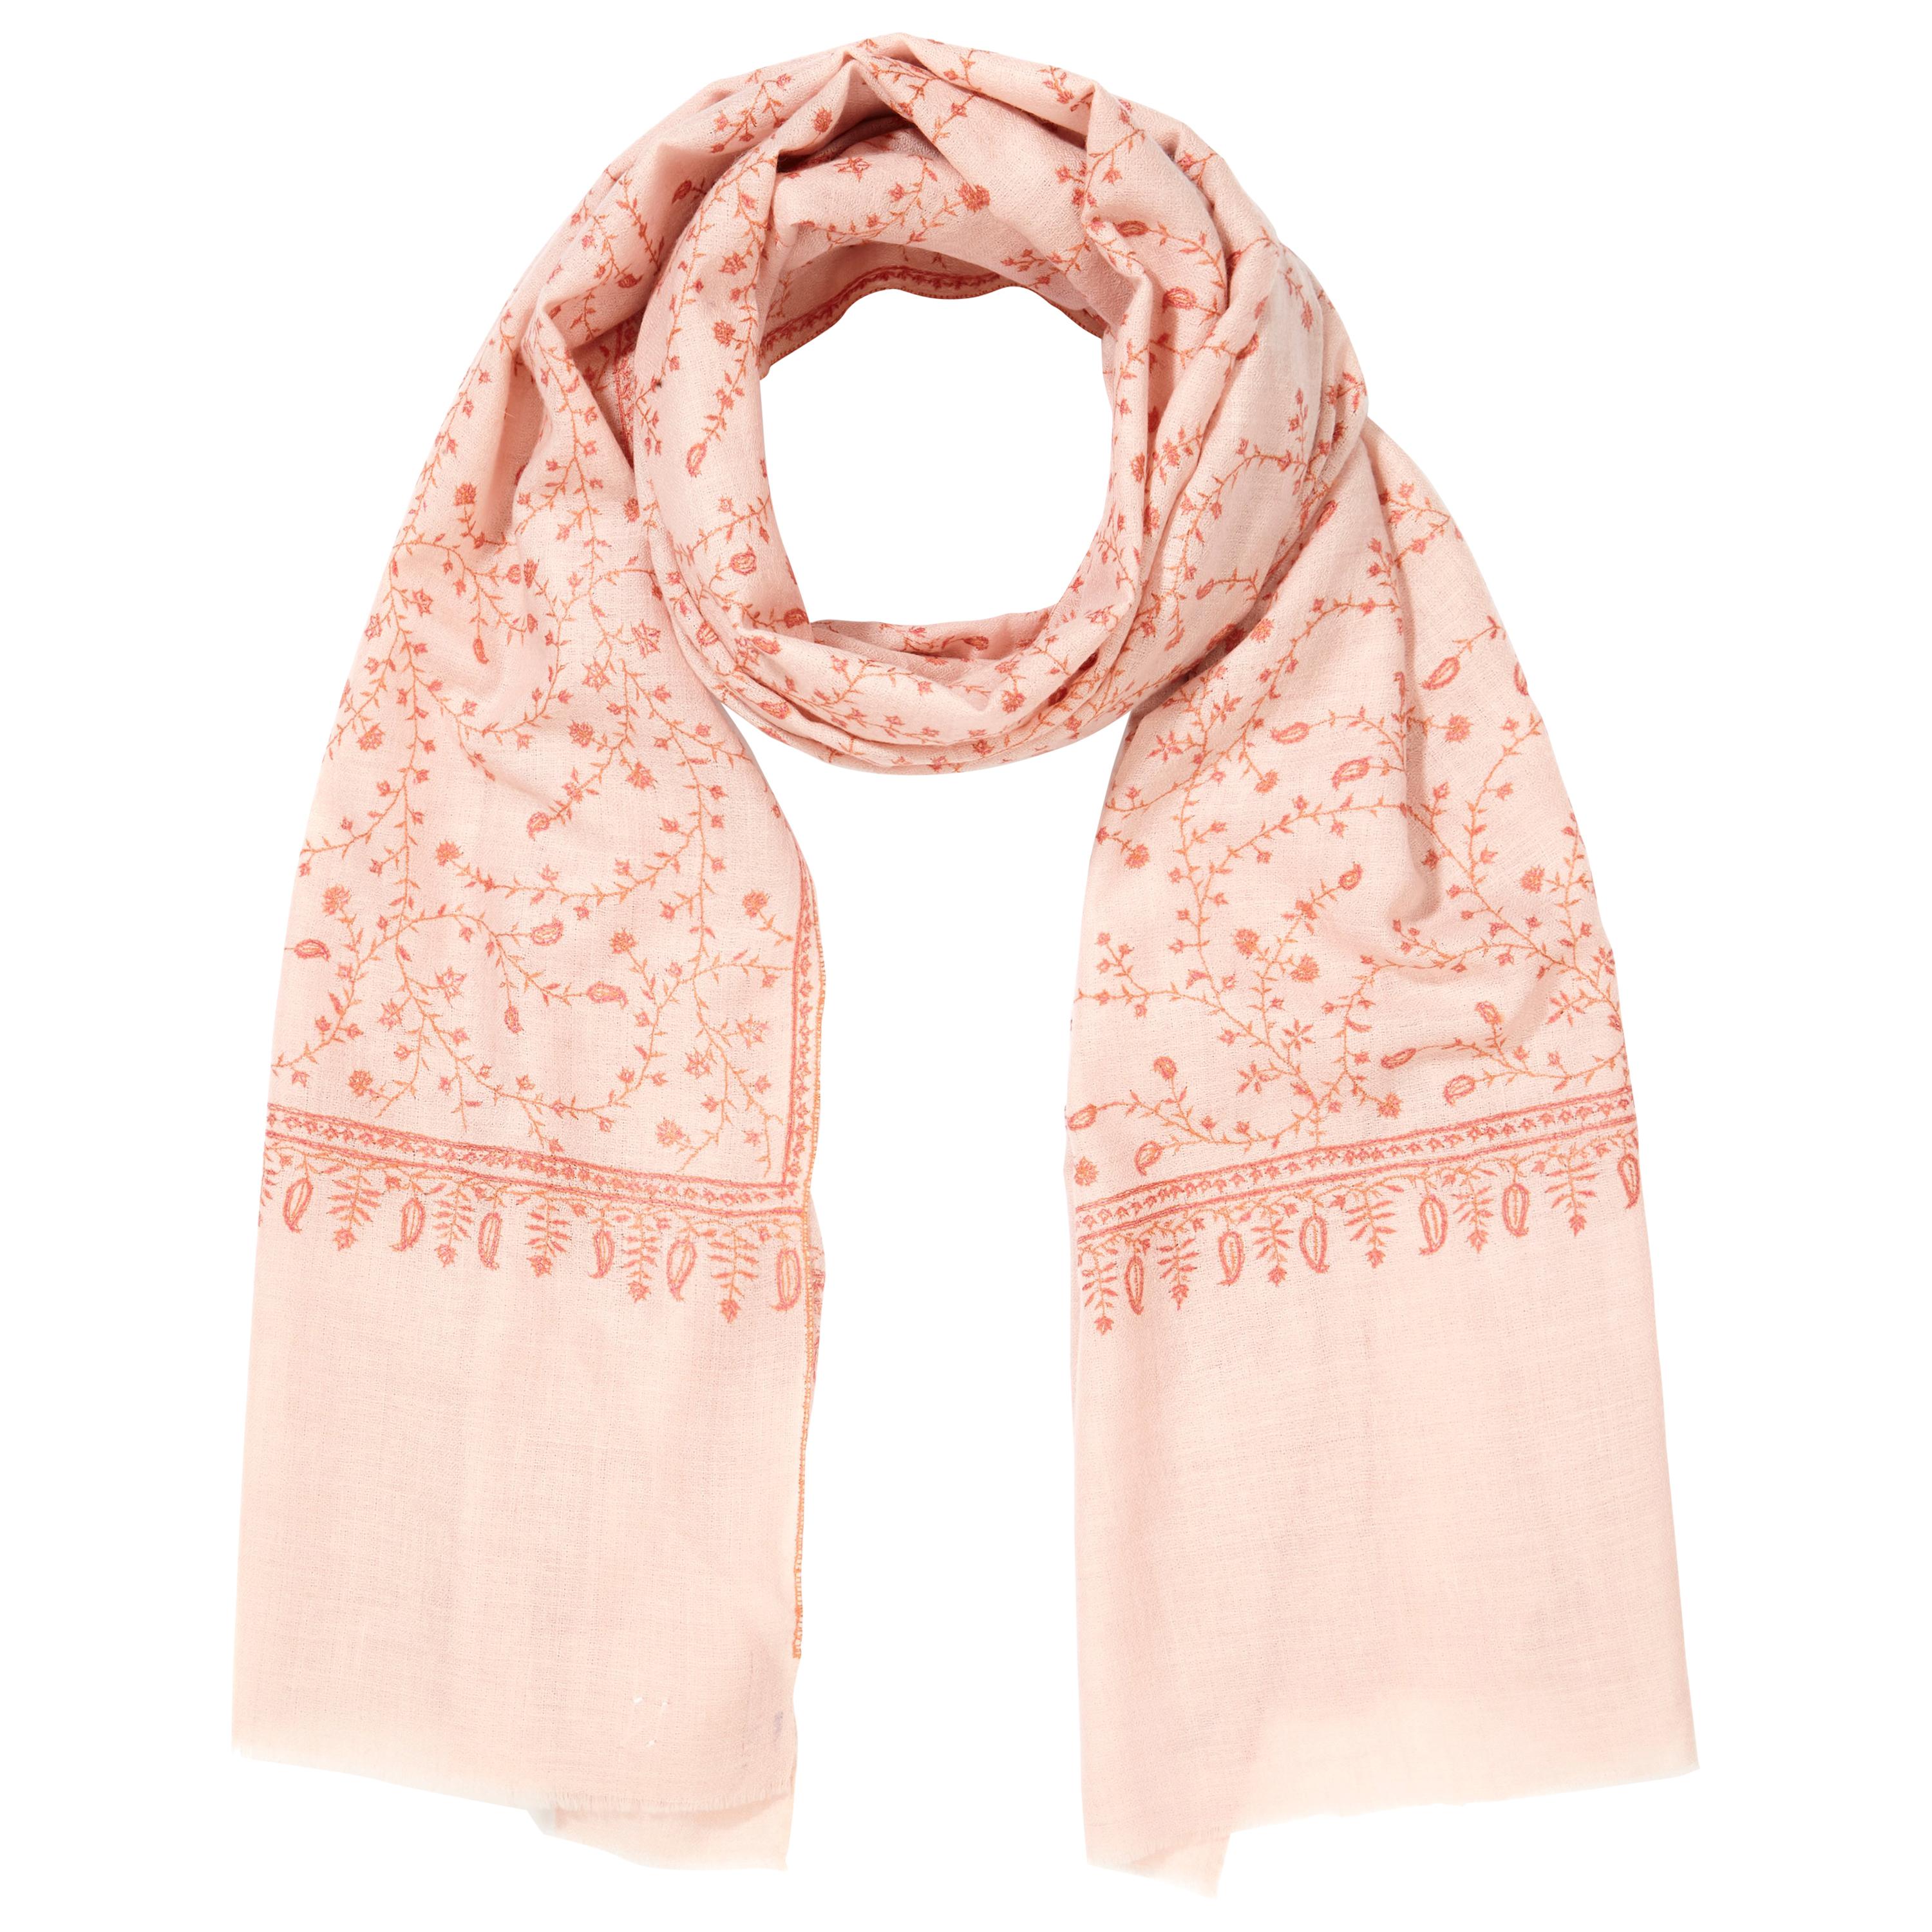 Limited Edition Hand Embroidered Pale Pink 100% Cashmere Shawl made in Kashmir 